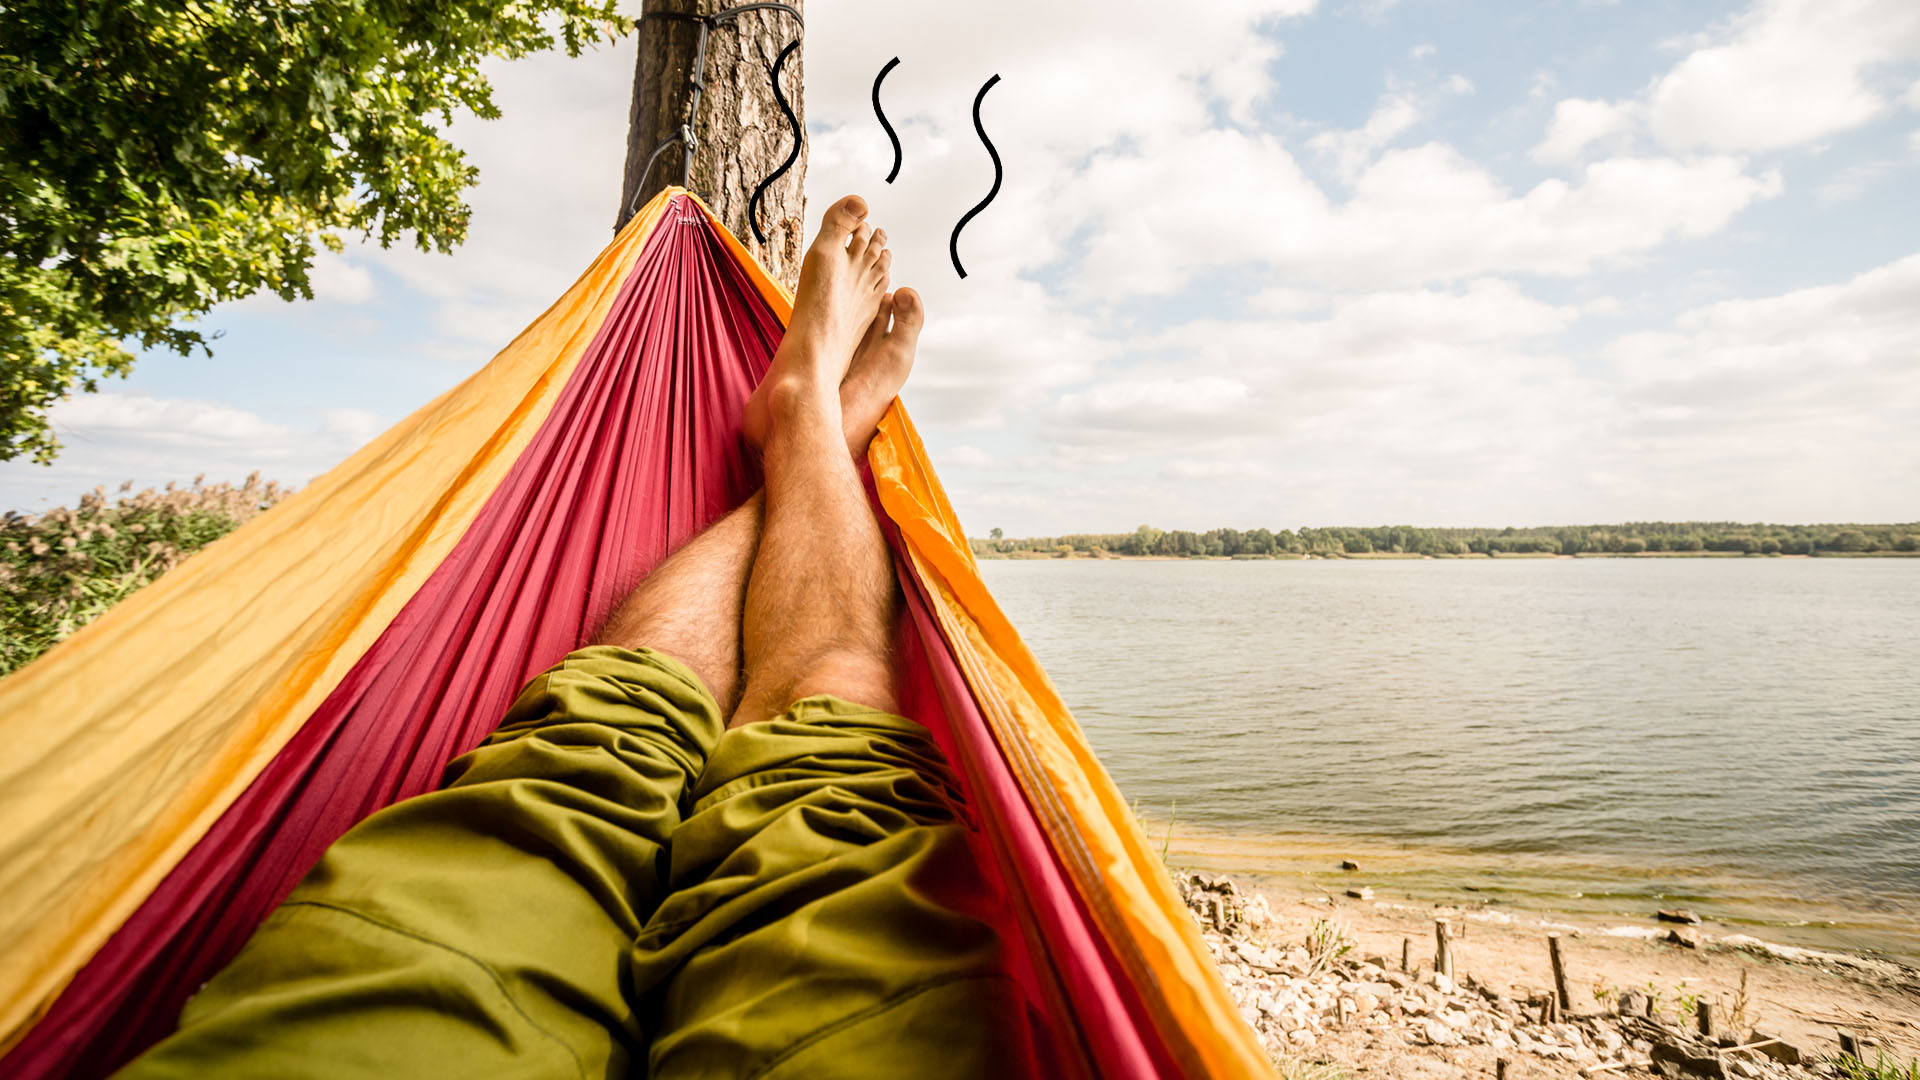 A man with stinky feet relaxing in a hammock by a lake